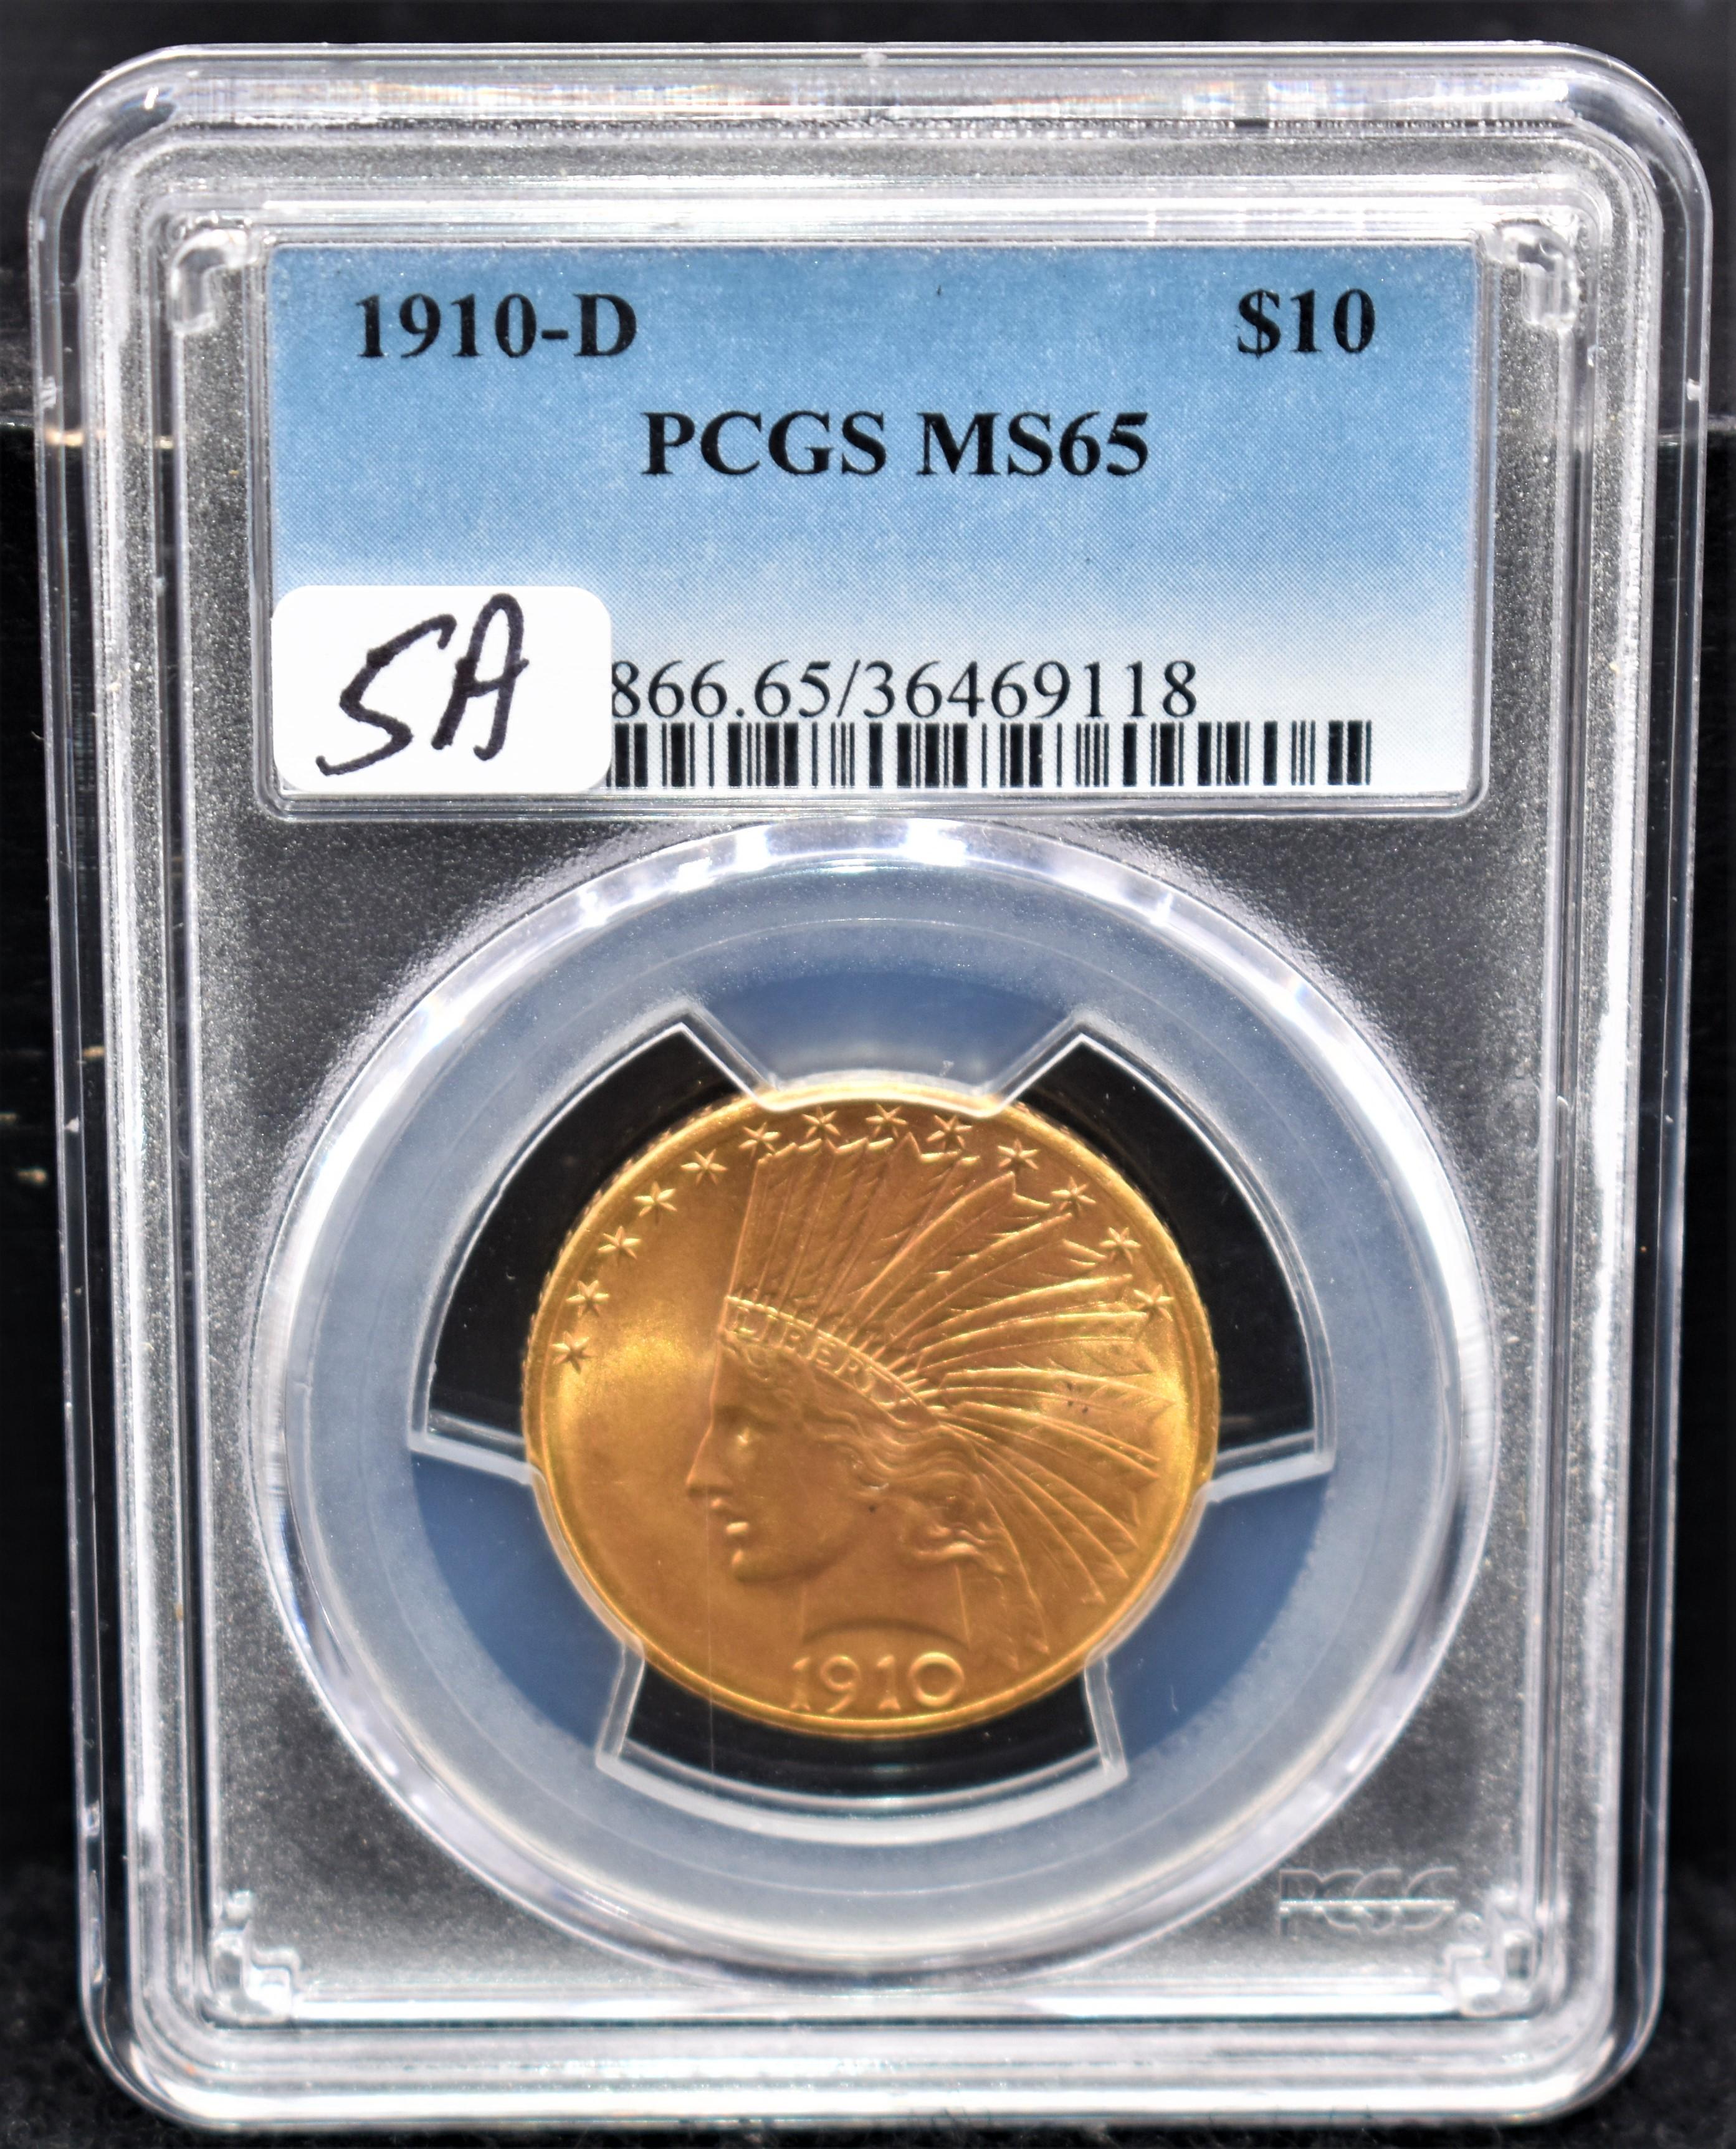 KEY 1910-D $10 INDIAN GOLD COIN PCGS MS65